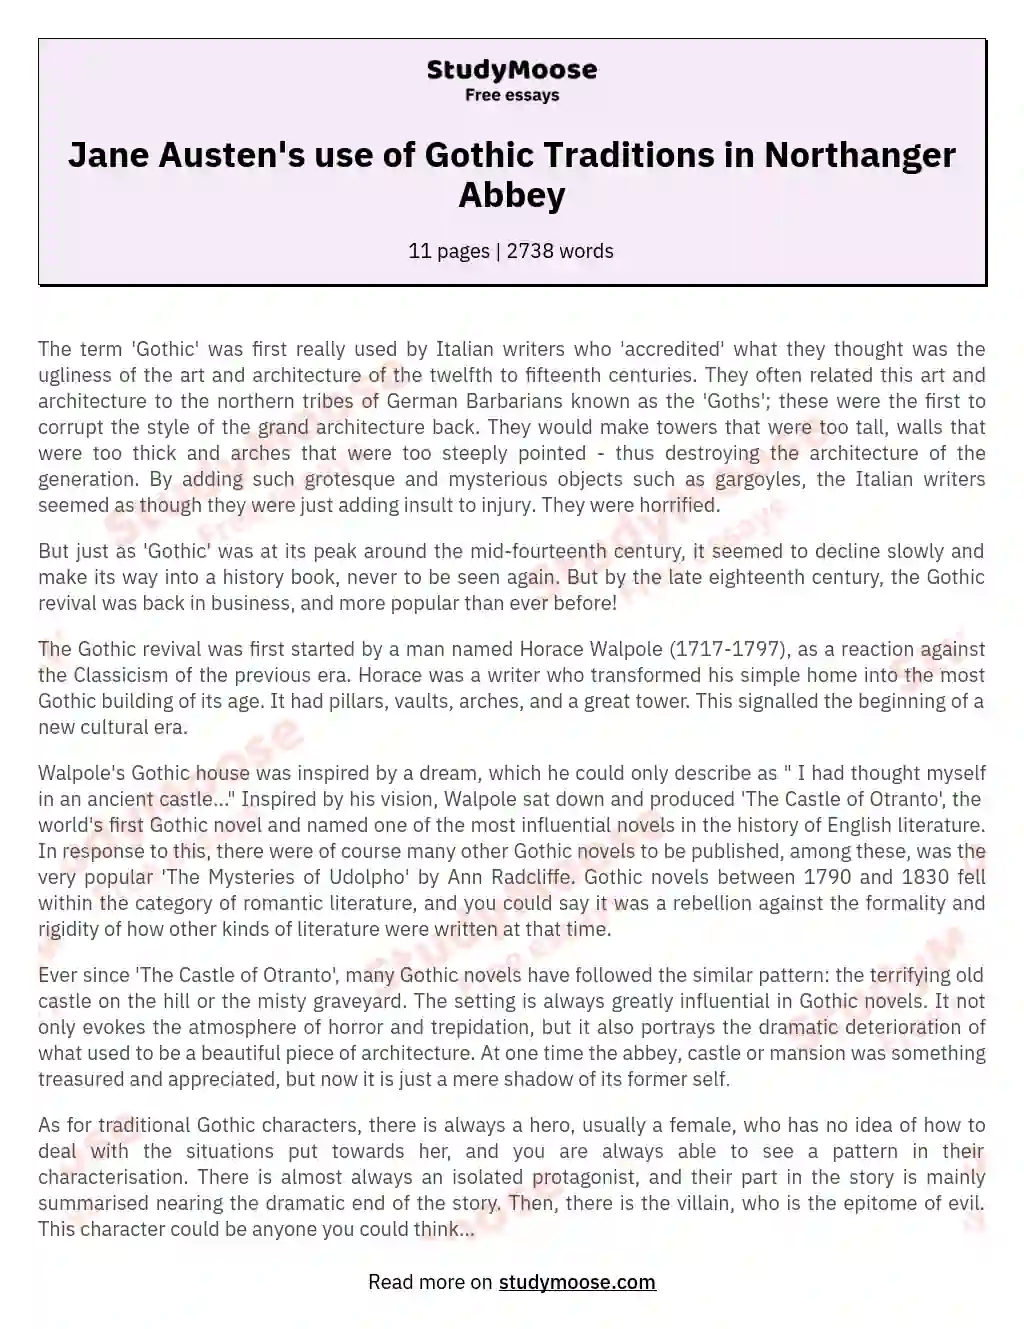 Jane Austen's use of Gothic Traditions in Northanger Abbey essay